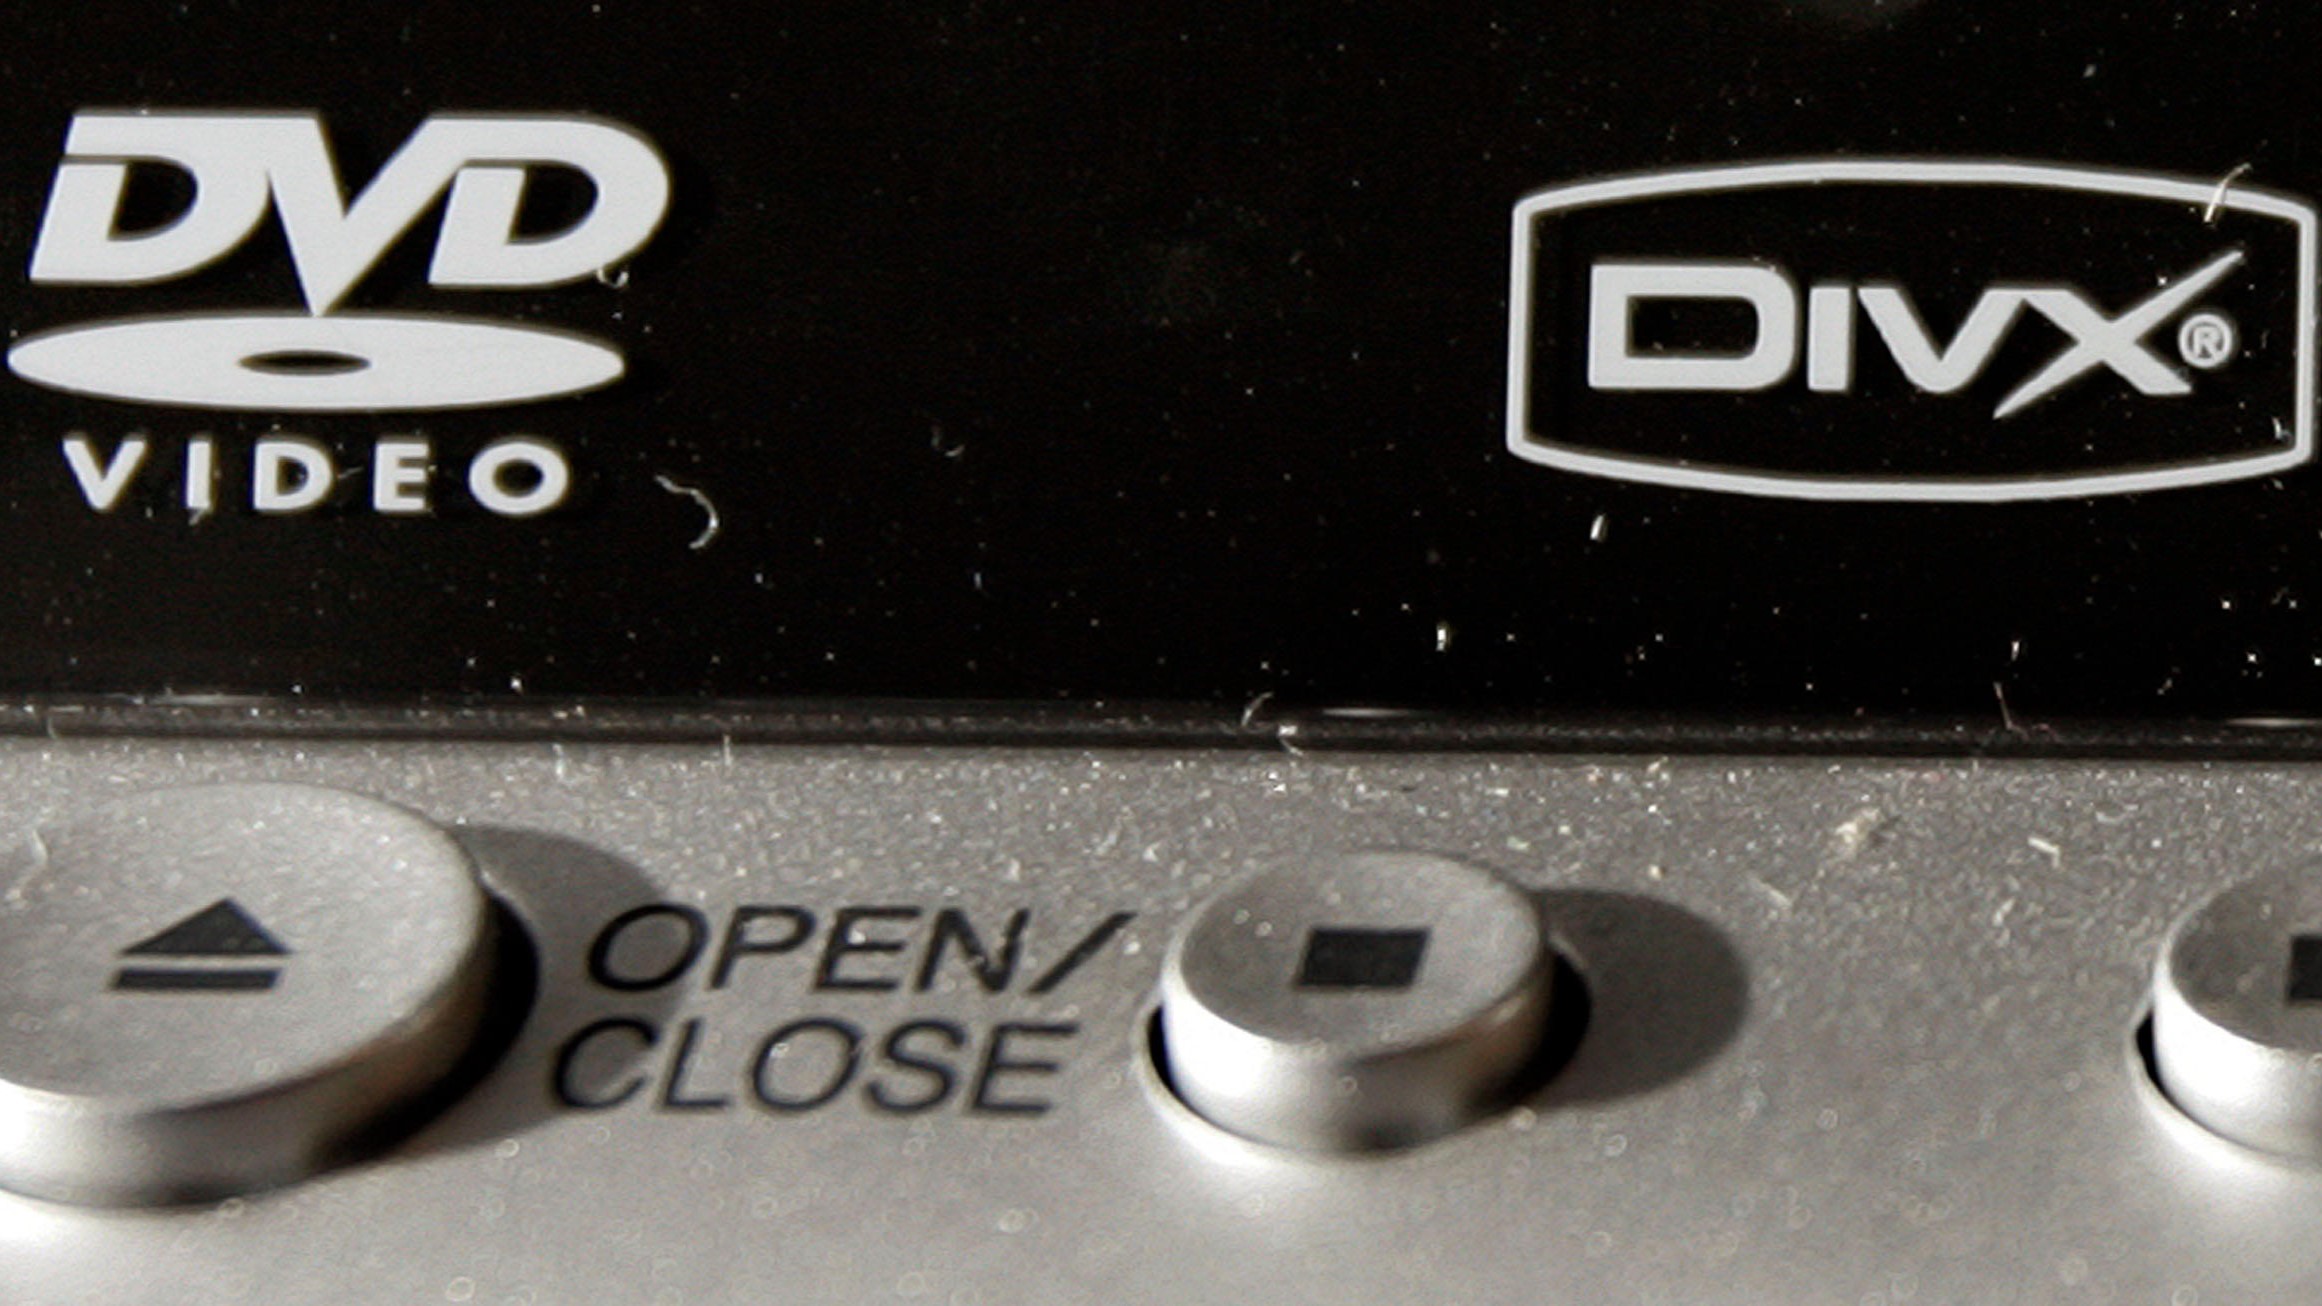 A combined DivX and DVD player close up.